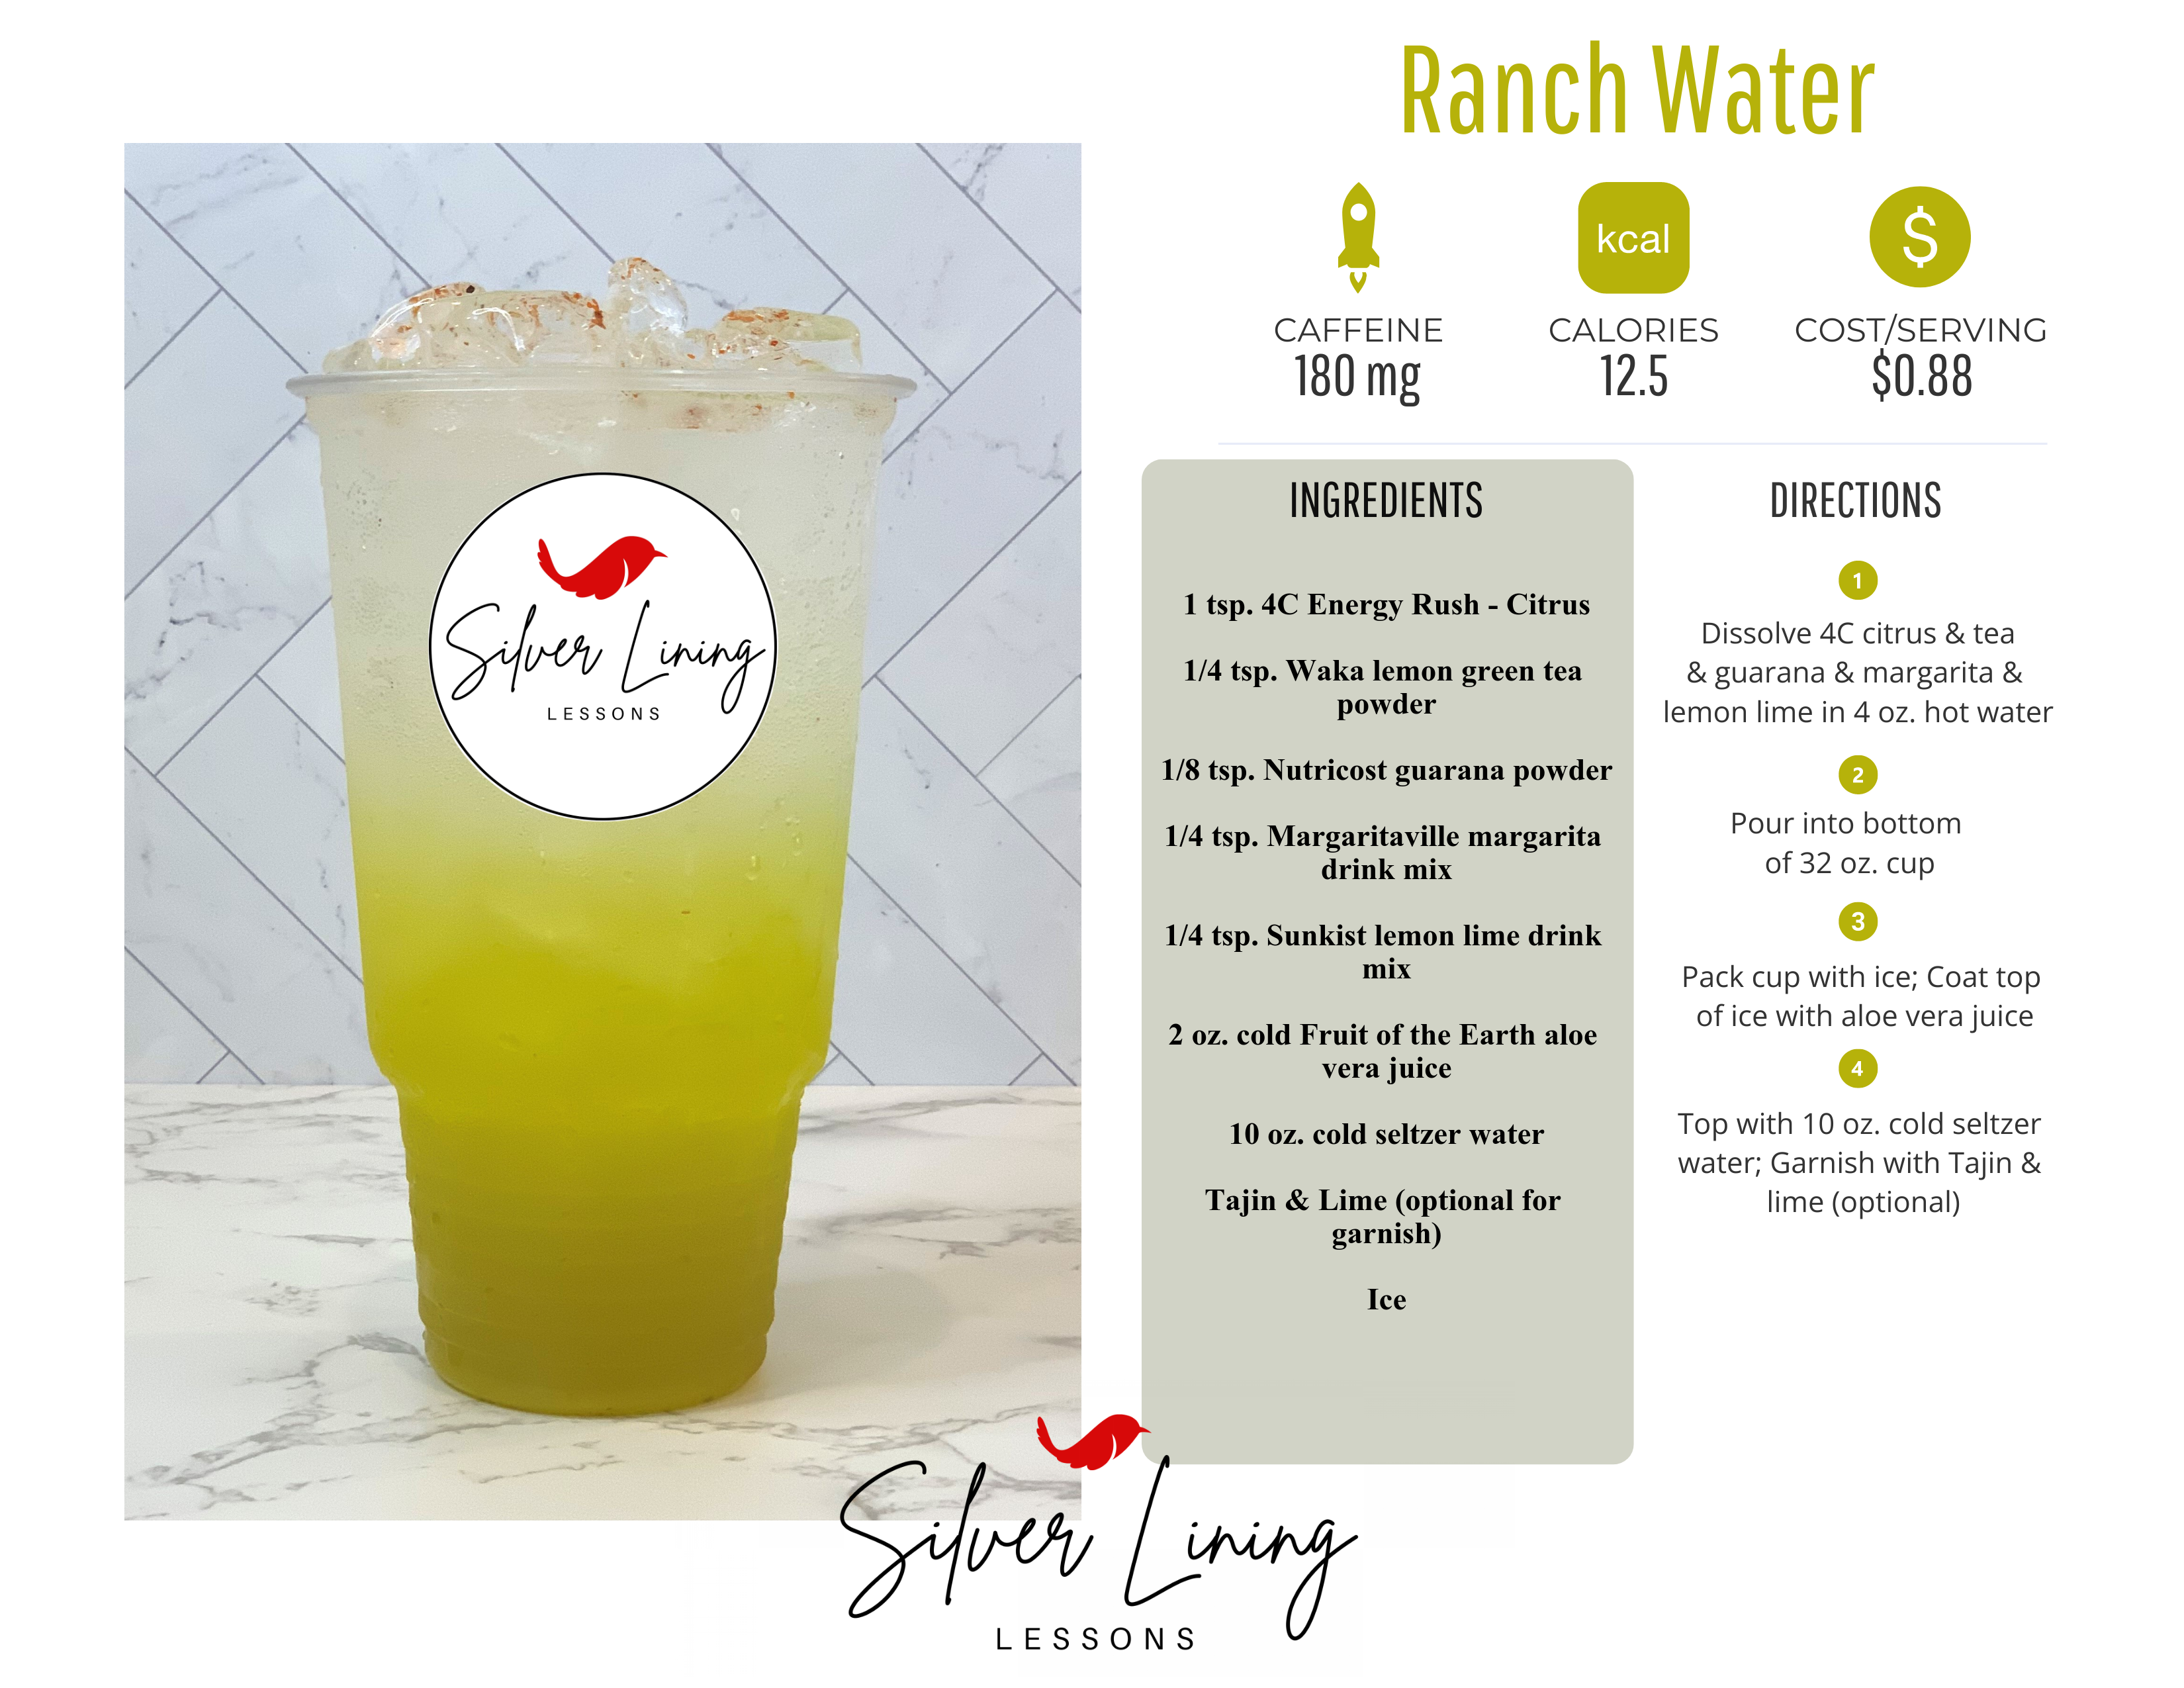 ranch-water-loaded-tea-recipe-card-by-silver-lining-lessons